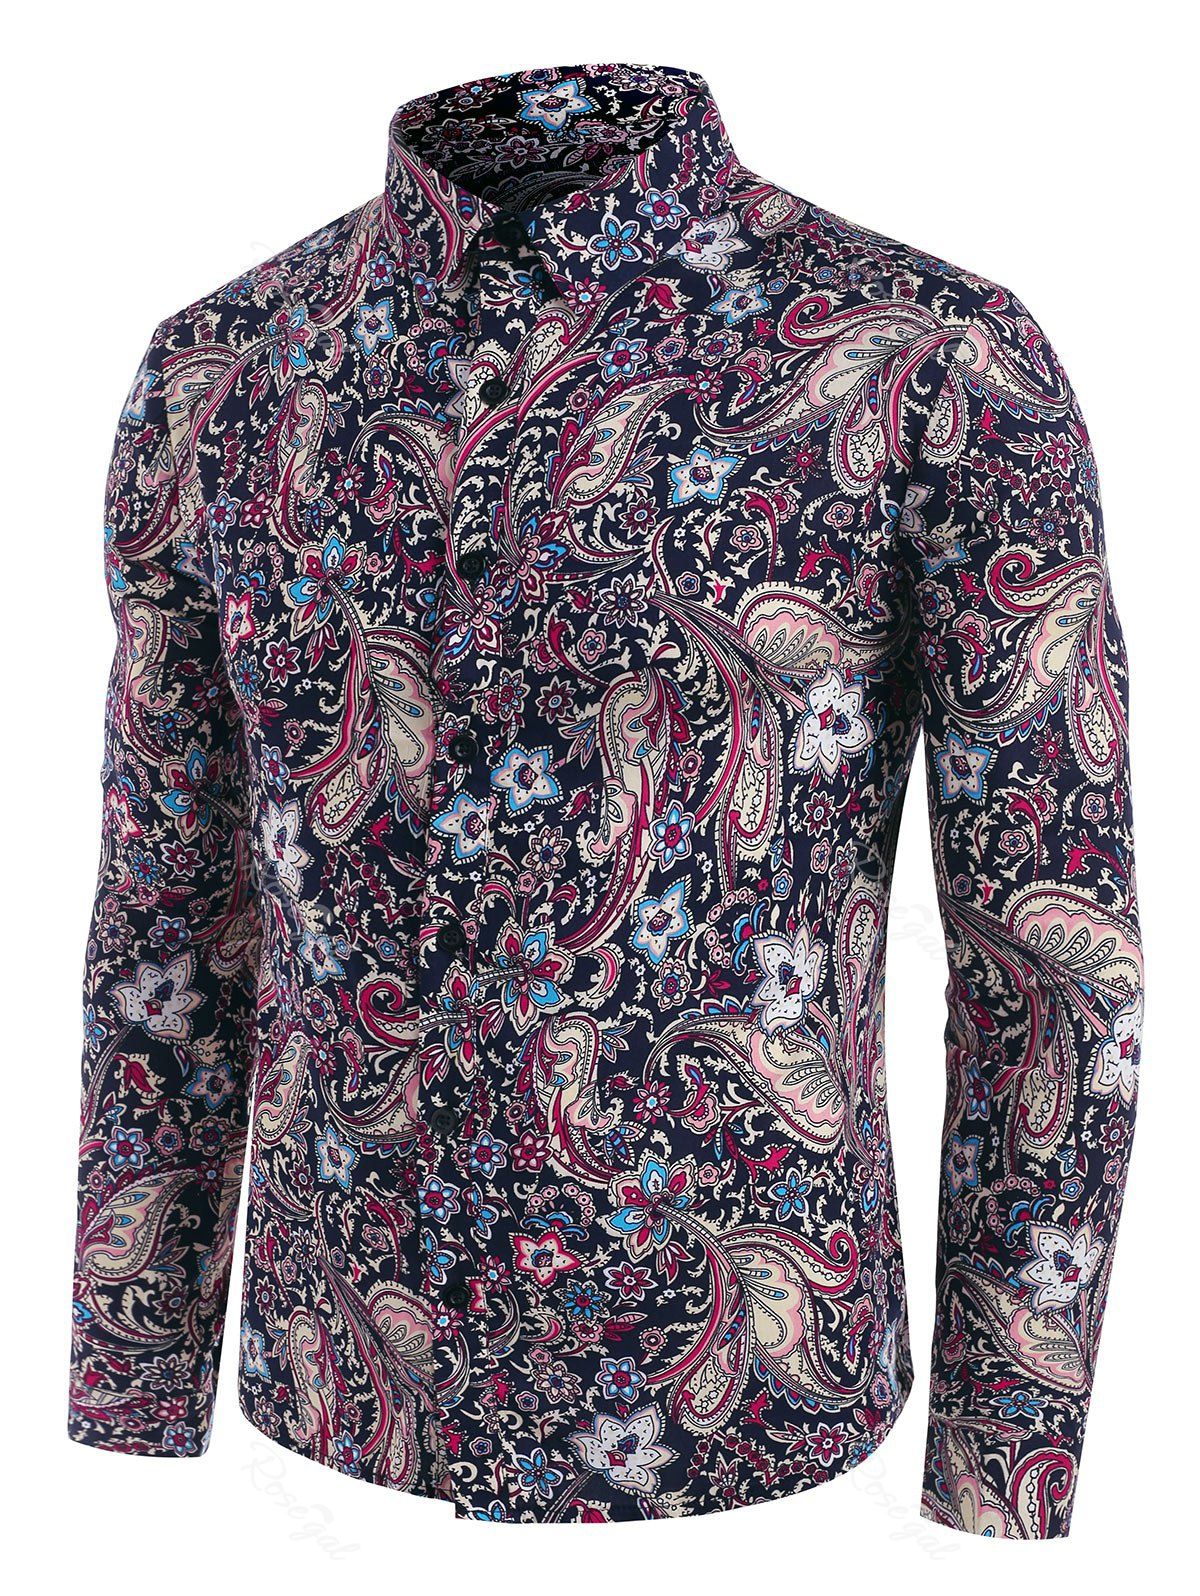 Affordable Floral Paisley Print Button Down Shirt  